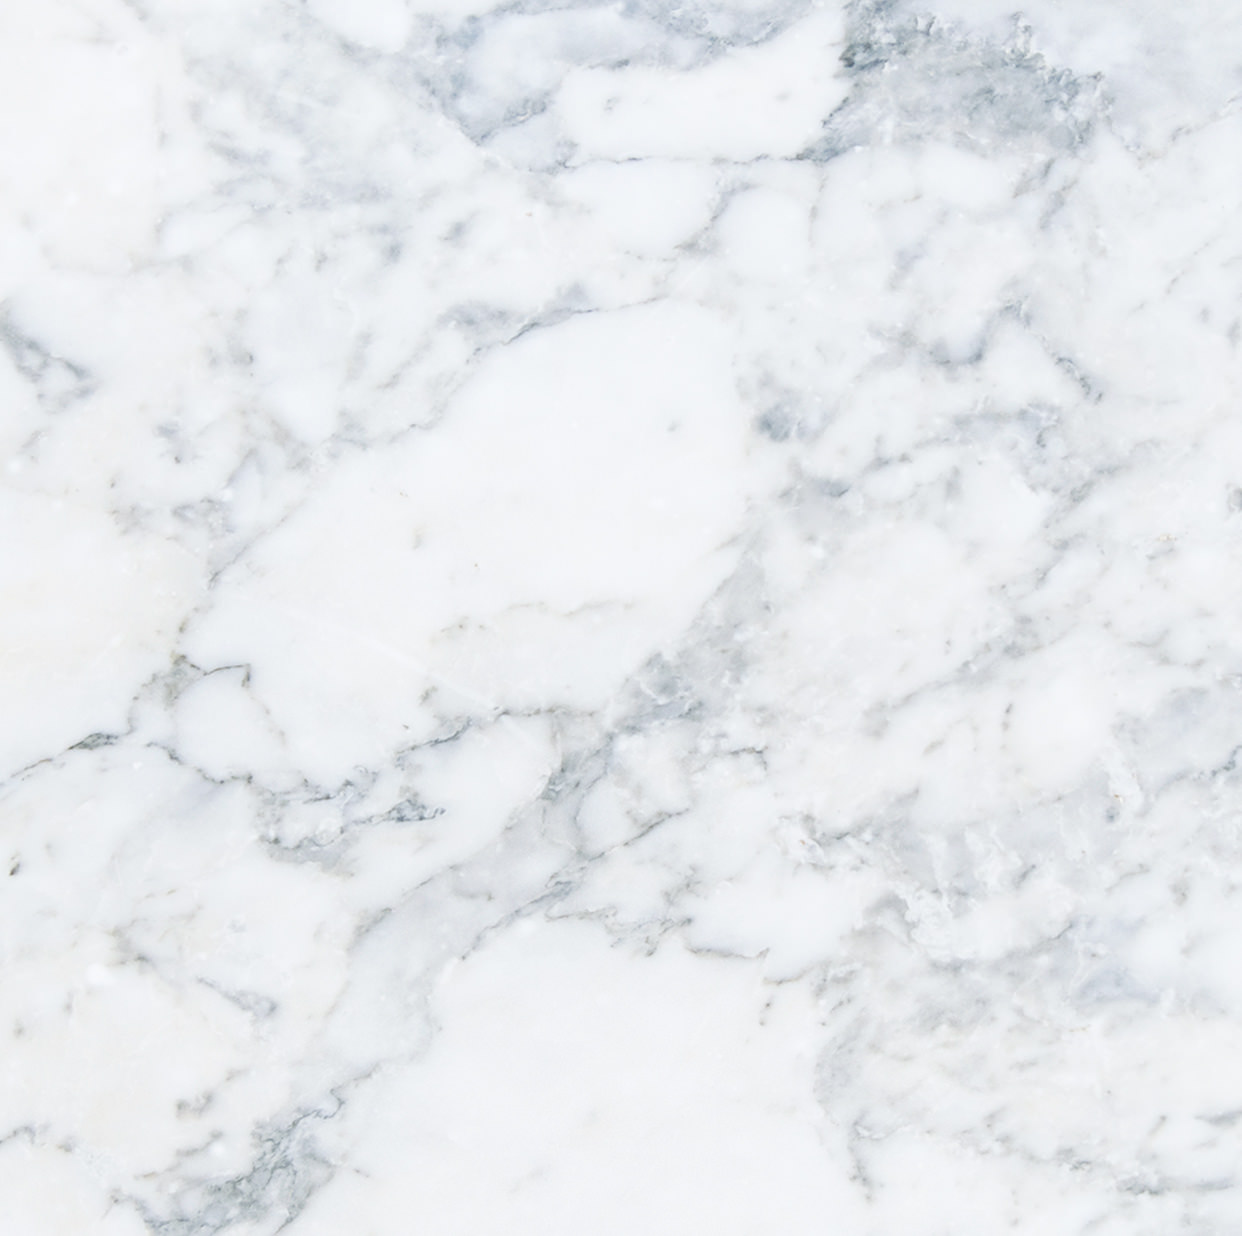 Marble Wallpaper Background Image Pictures